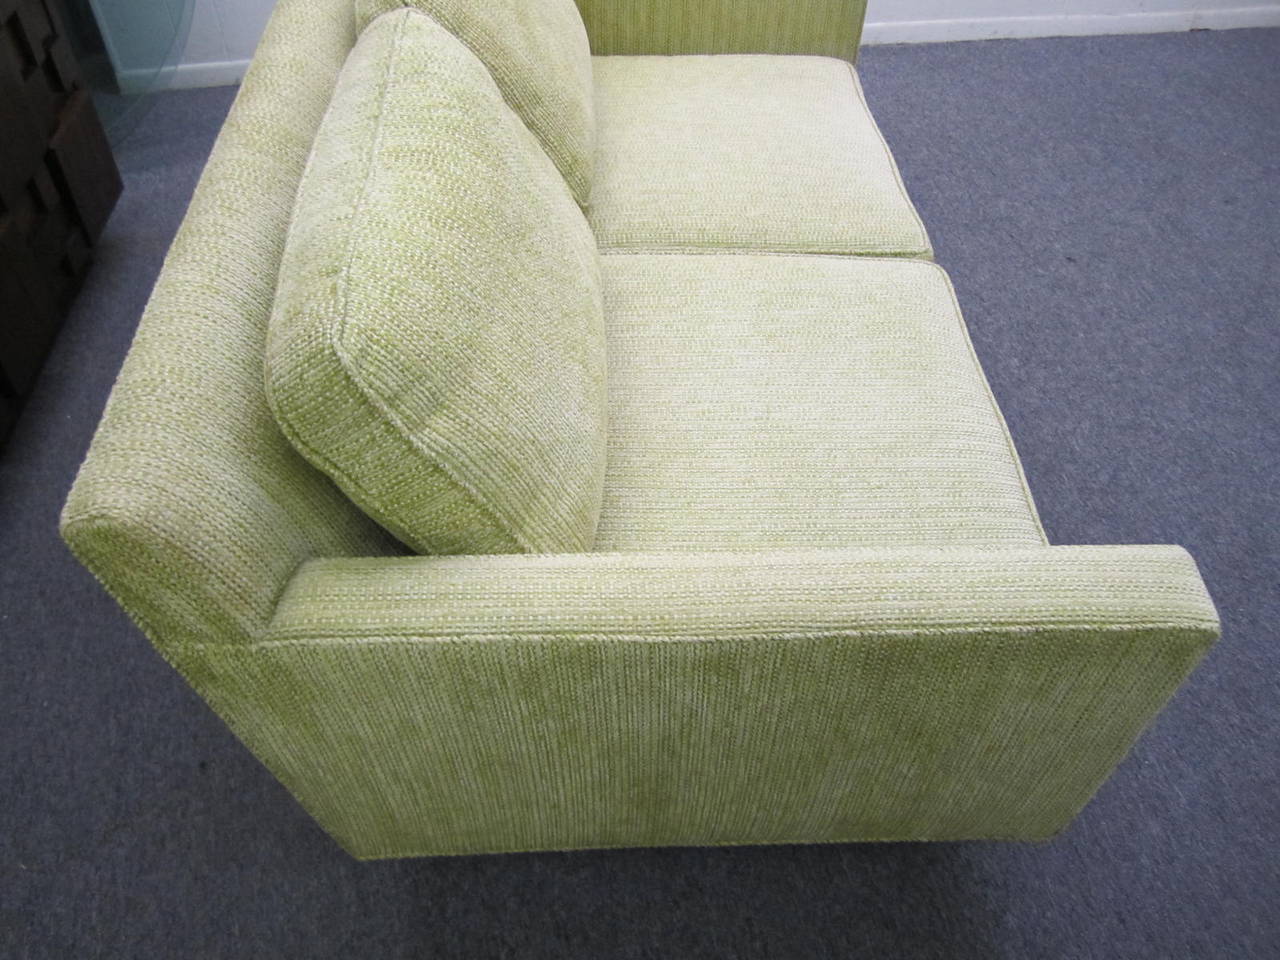 Mid-Century Modern Two-Seater Loveseat Sofa by Edward Wormley for Dunbar In Good Condition For Sale In Pemberton, NJ